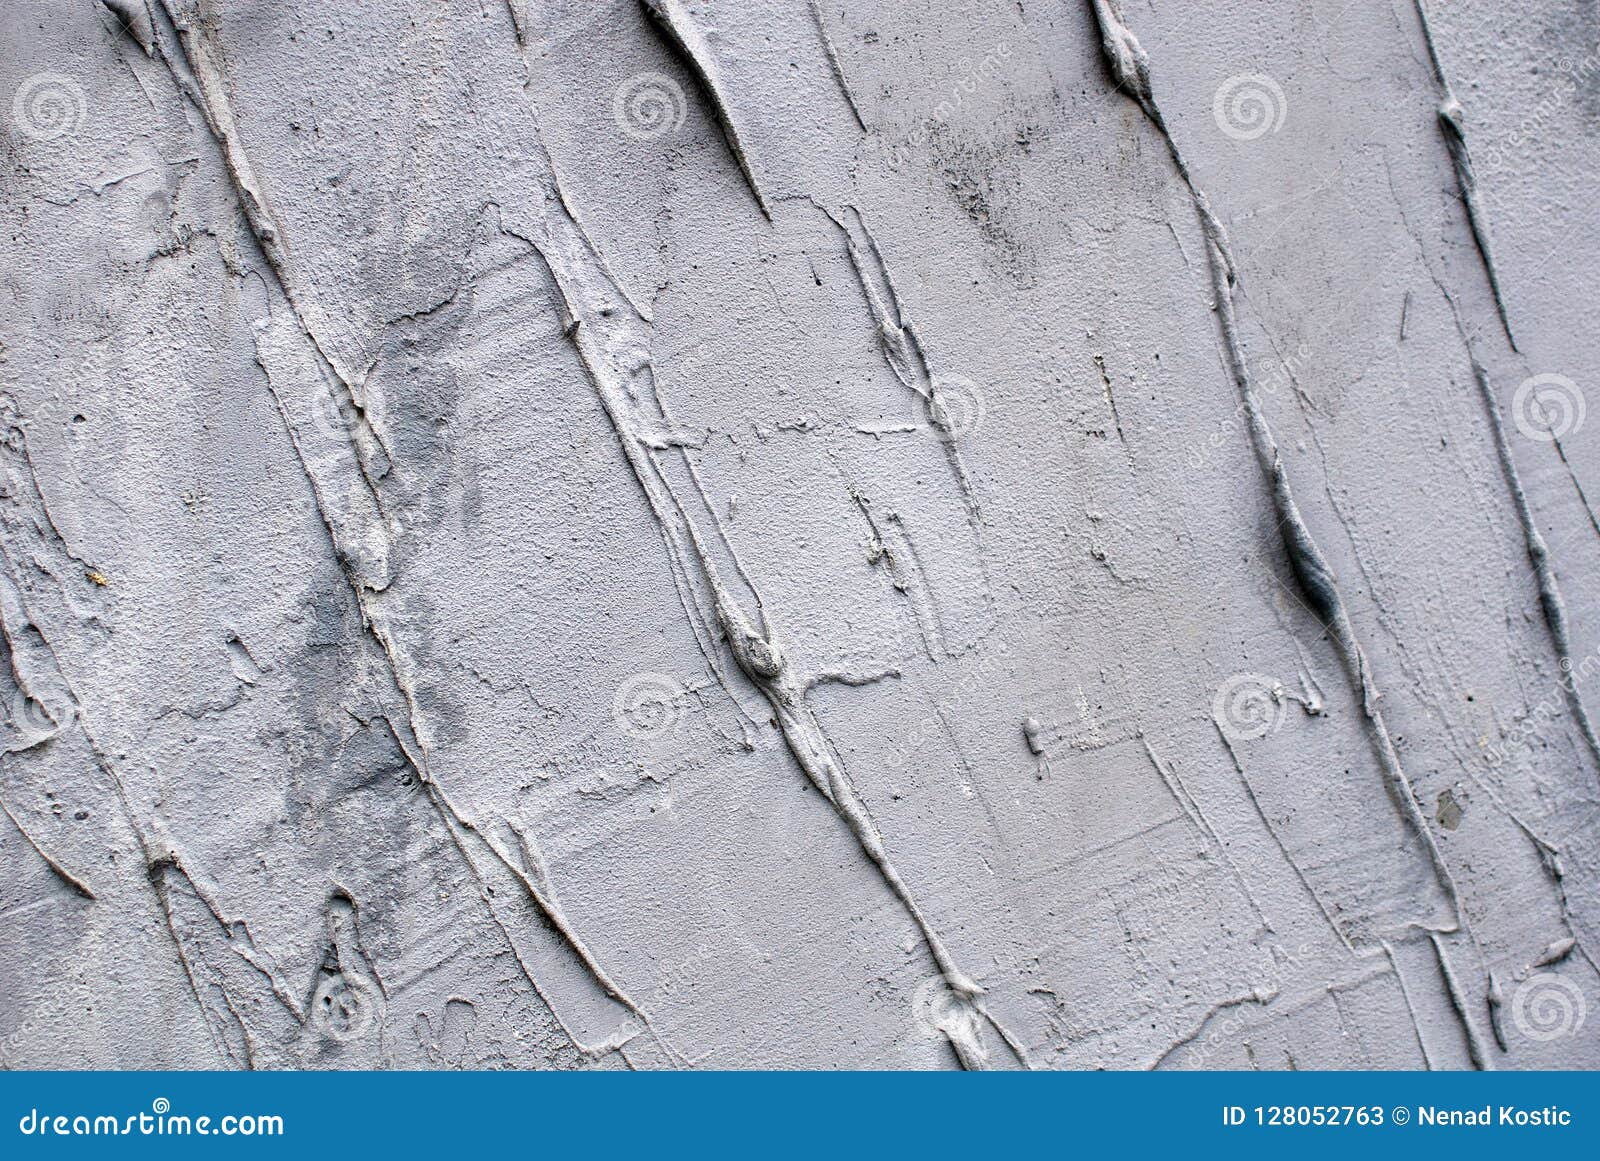 Close Up Plaster Wall Texture For Backgrounds And Interesting Textures Stock Image Image Of Frame Construction